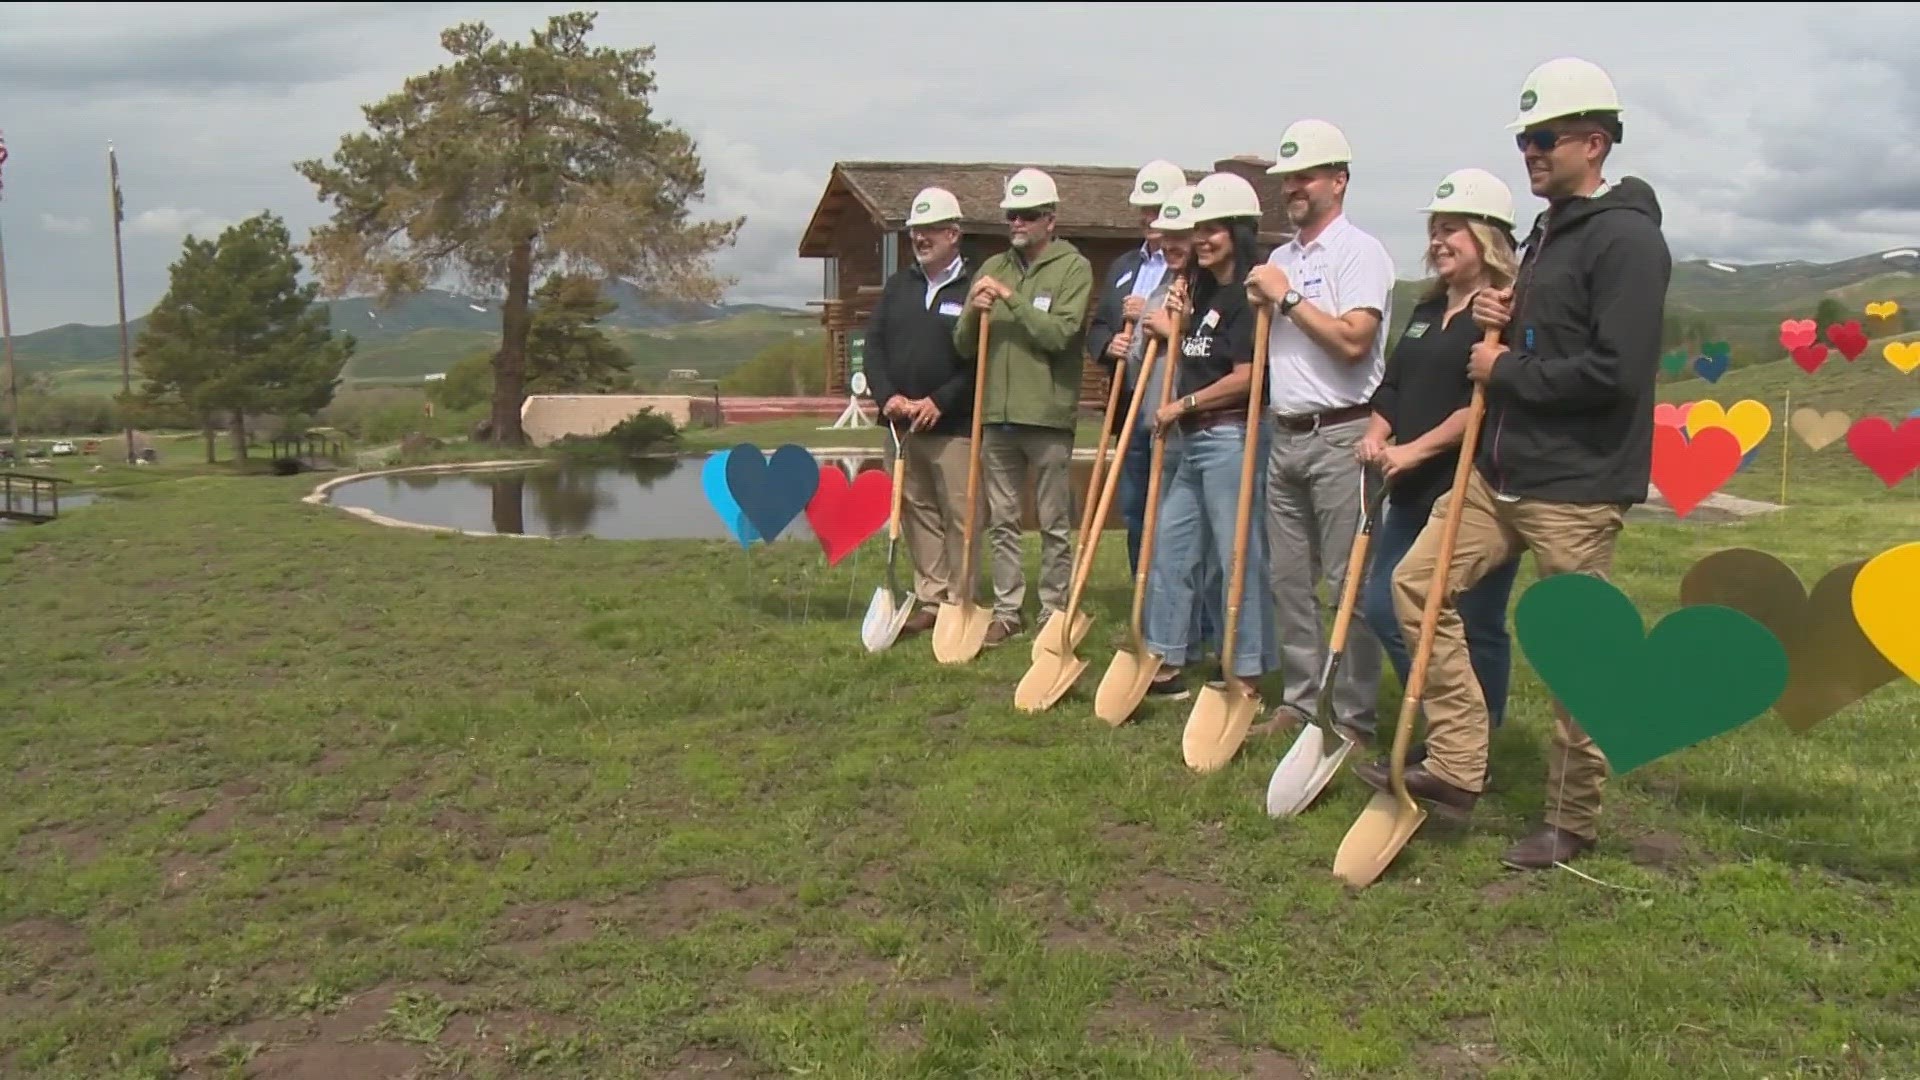 Construction on Hidden Paradise, Idaho's first medical camp, began two years ago. On Thursday, Camp Rainbow Gold celebrated the facility's ground breaking.